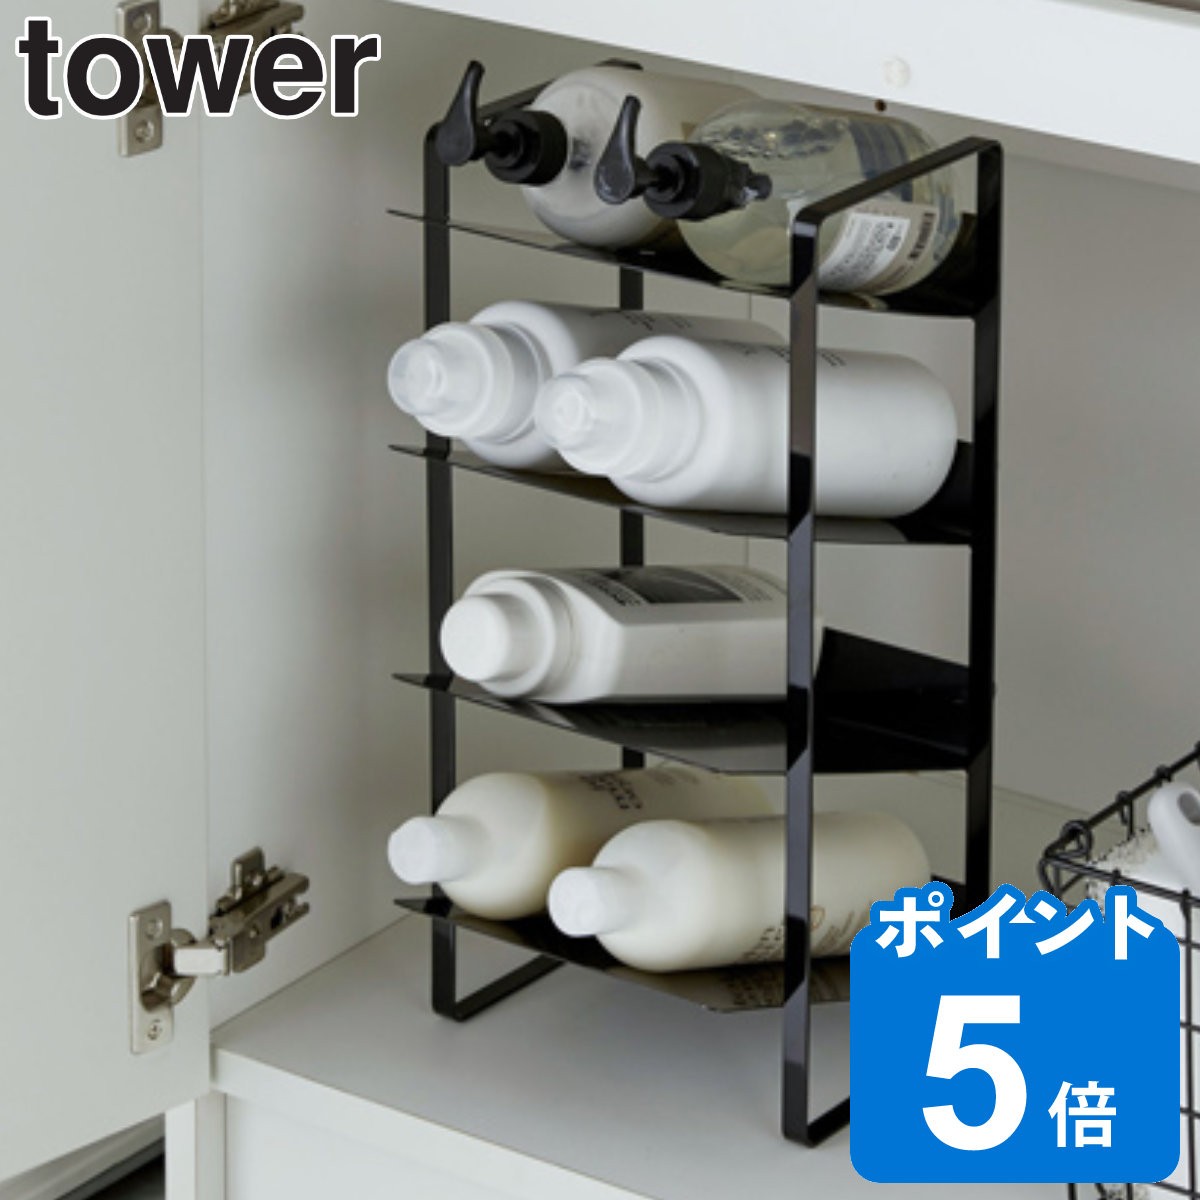 R tower VN{gXgbJ[ 4i ^[